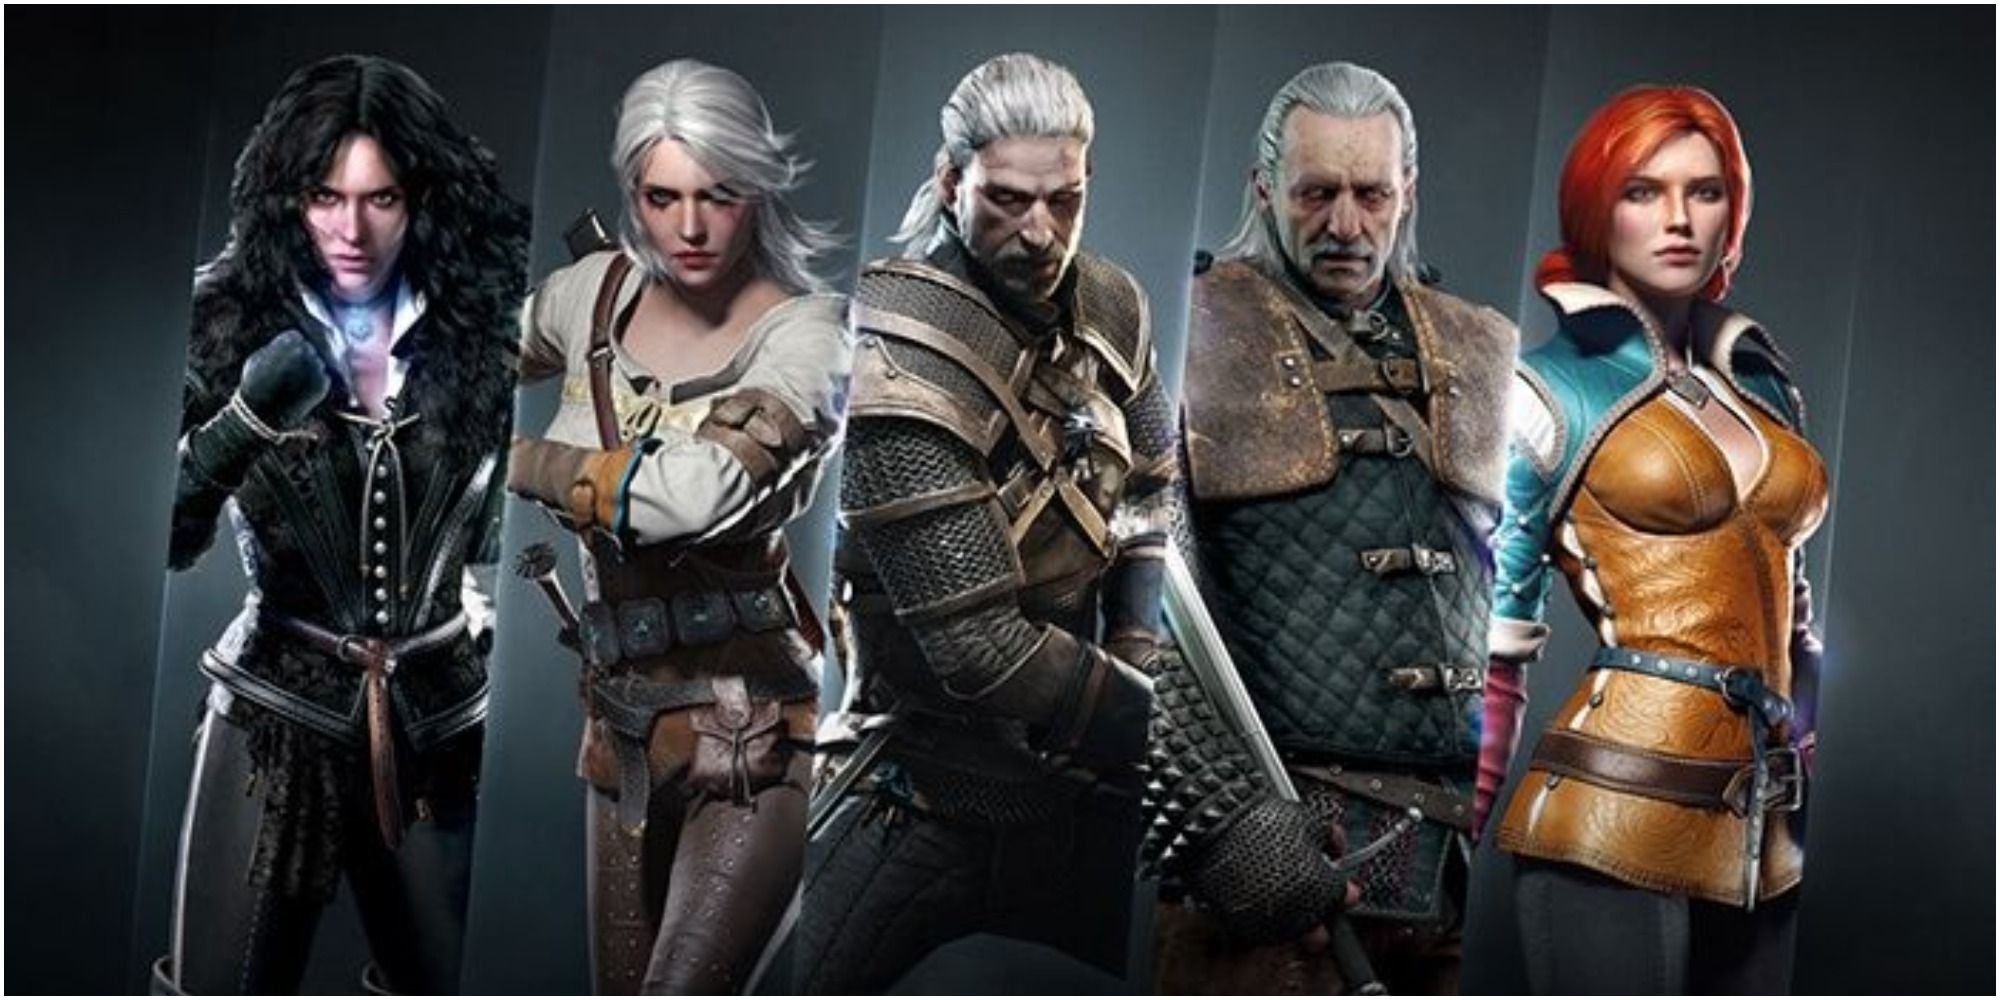 Guide - The Witcher III Wild Hunt Xbox One Ps4 PlayStation 4